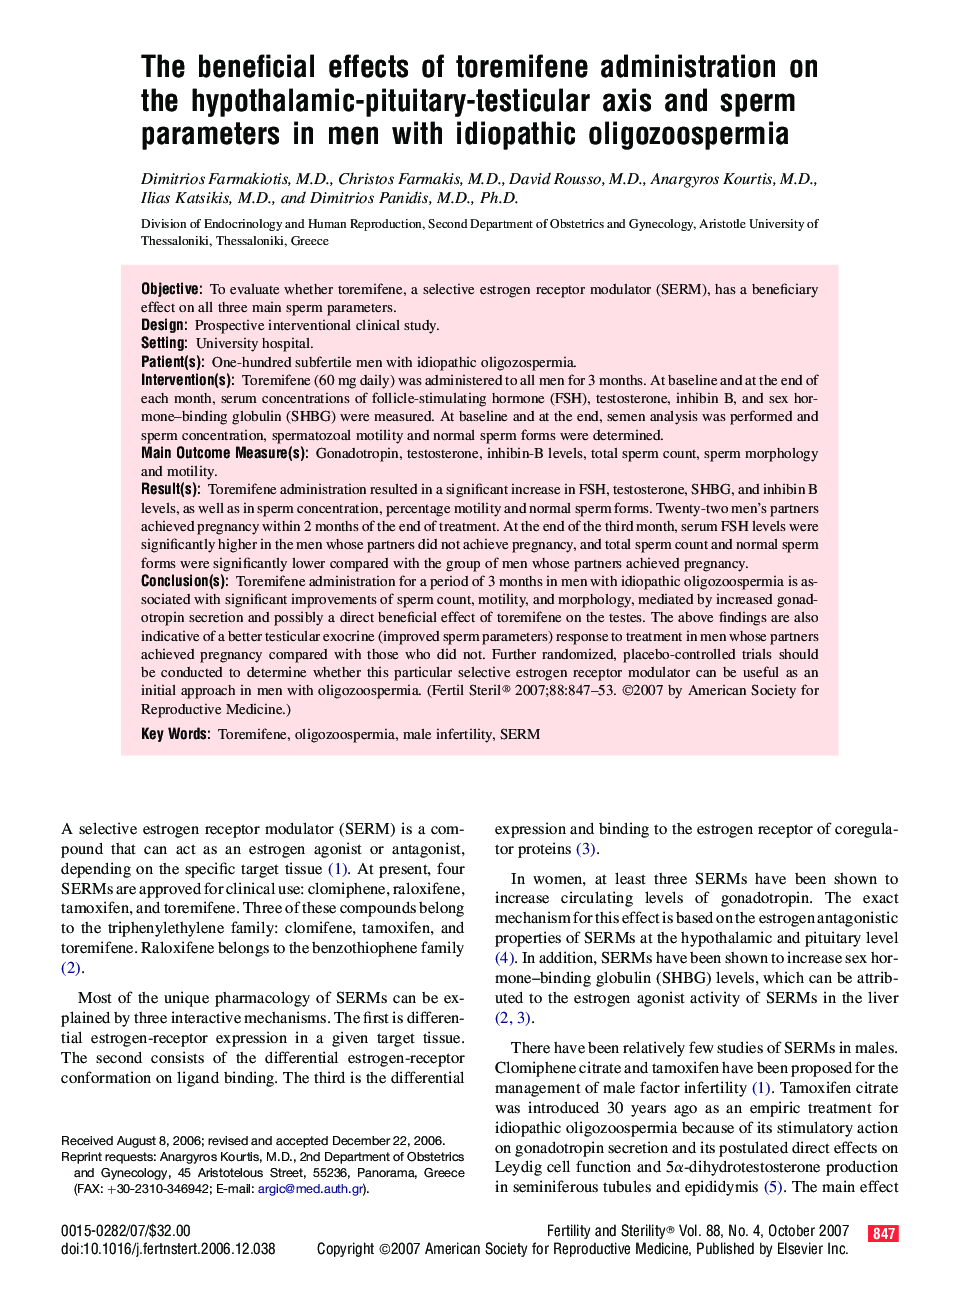 The beneficial effects of toremifene administration on the hypothalamic-pituitary-testicular axis and sperm parameters in men with idiopathic oligozoospermia